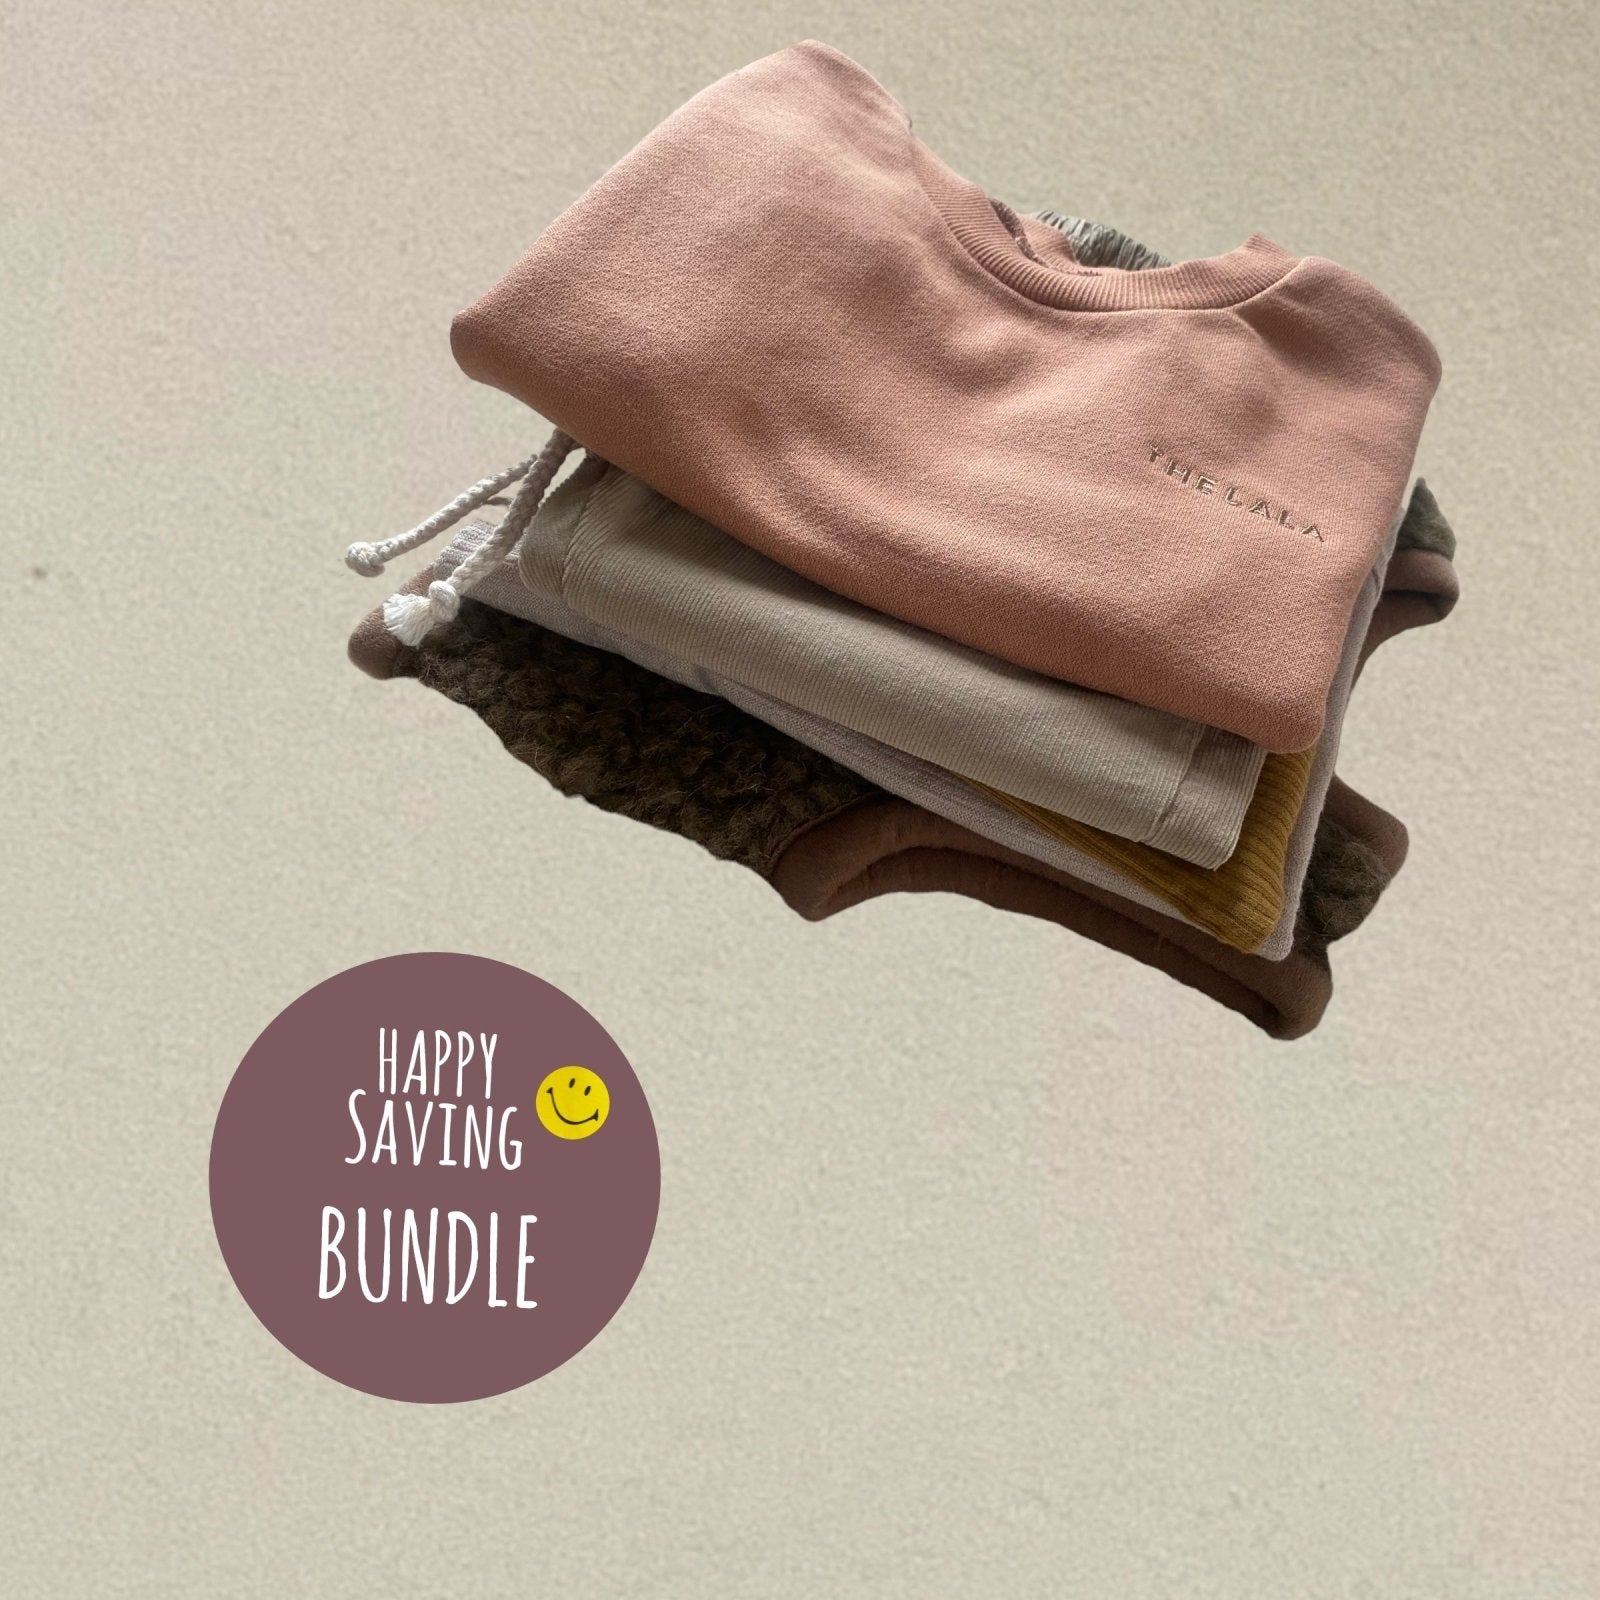 Happy Saving BUNDLE - 12/18 Monate Unisex find Stylish Fashion for Little People- at Little Foxx Concept Store